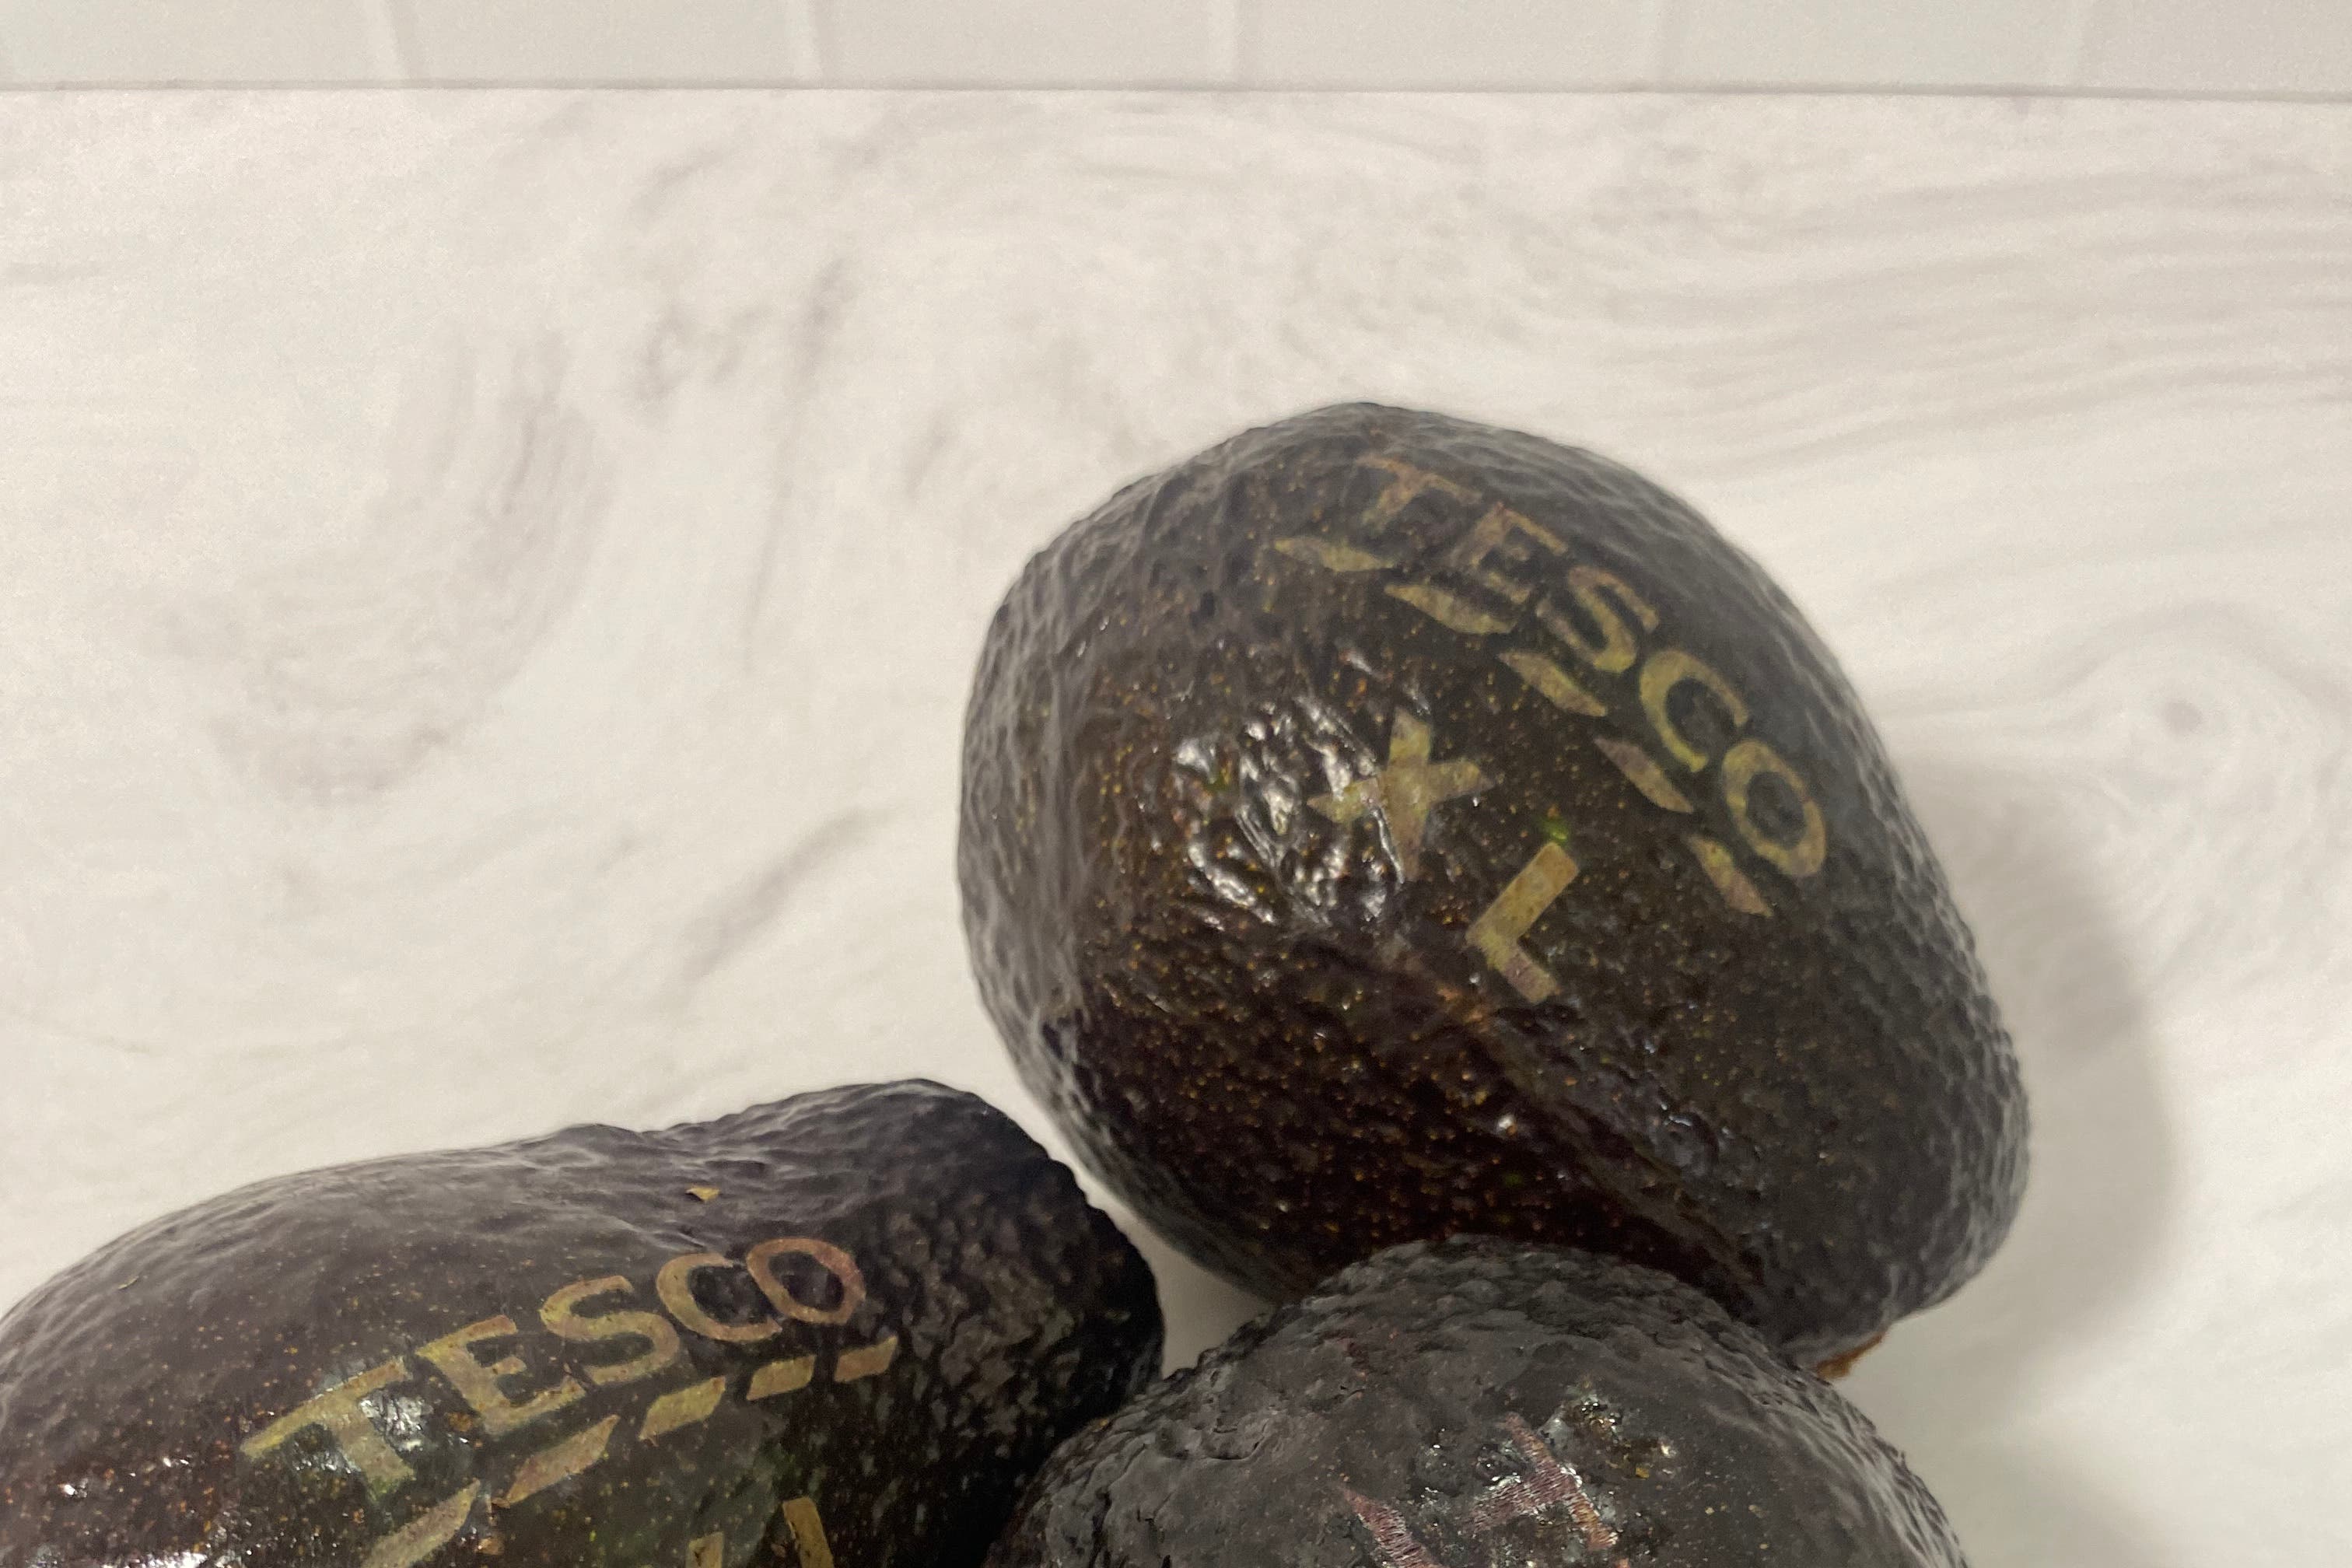 Tesco is to use laser-etchings on its extra large avocados instead of stickers in a trial designed to help the environment (Tesco/ PA)